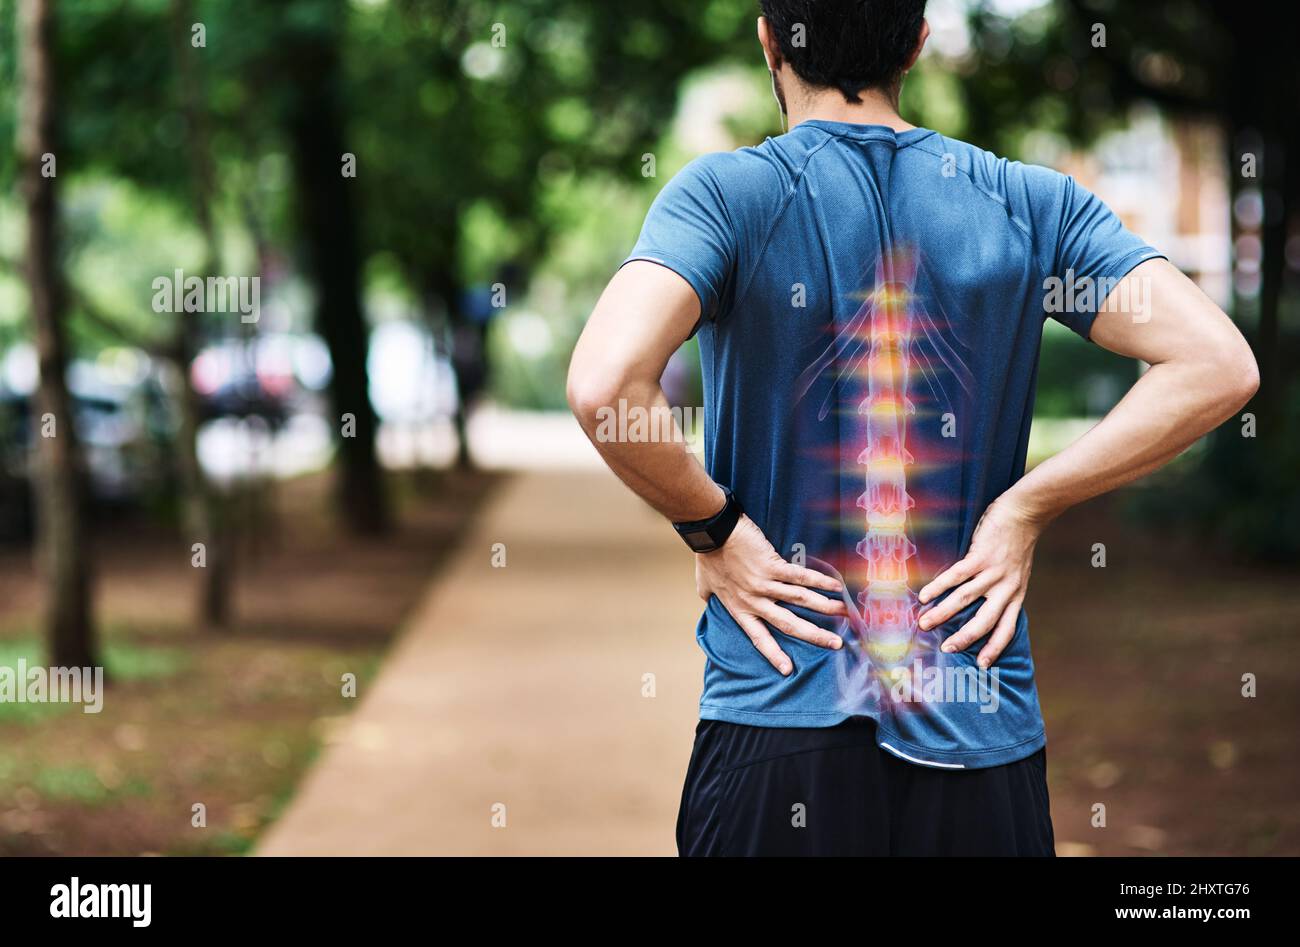 Hes overdone it this time with his training. Rear view shot of a sporty young man holding his back in pain while exercising outdoors. Stock Photo